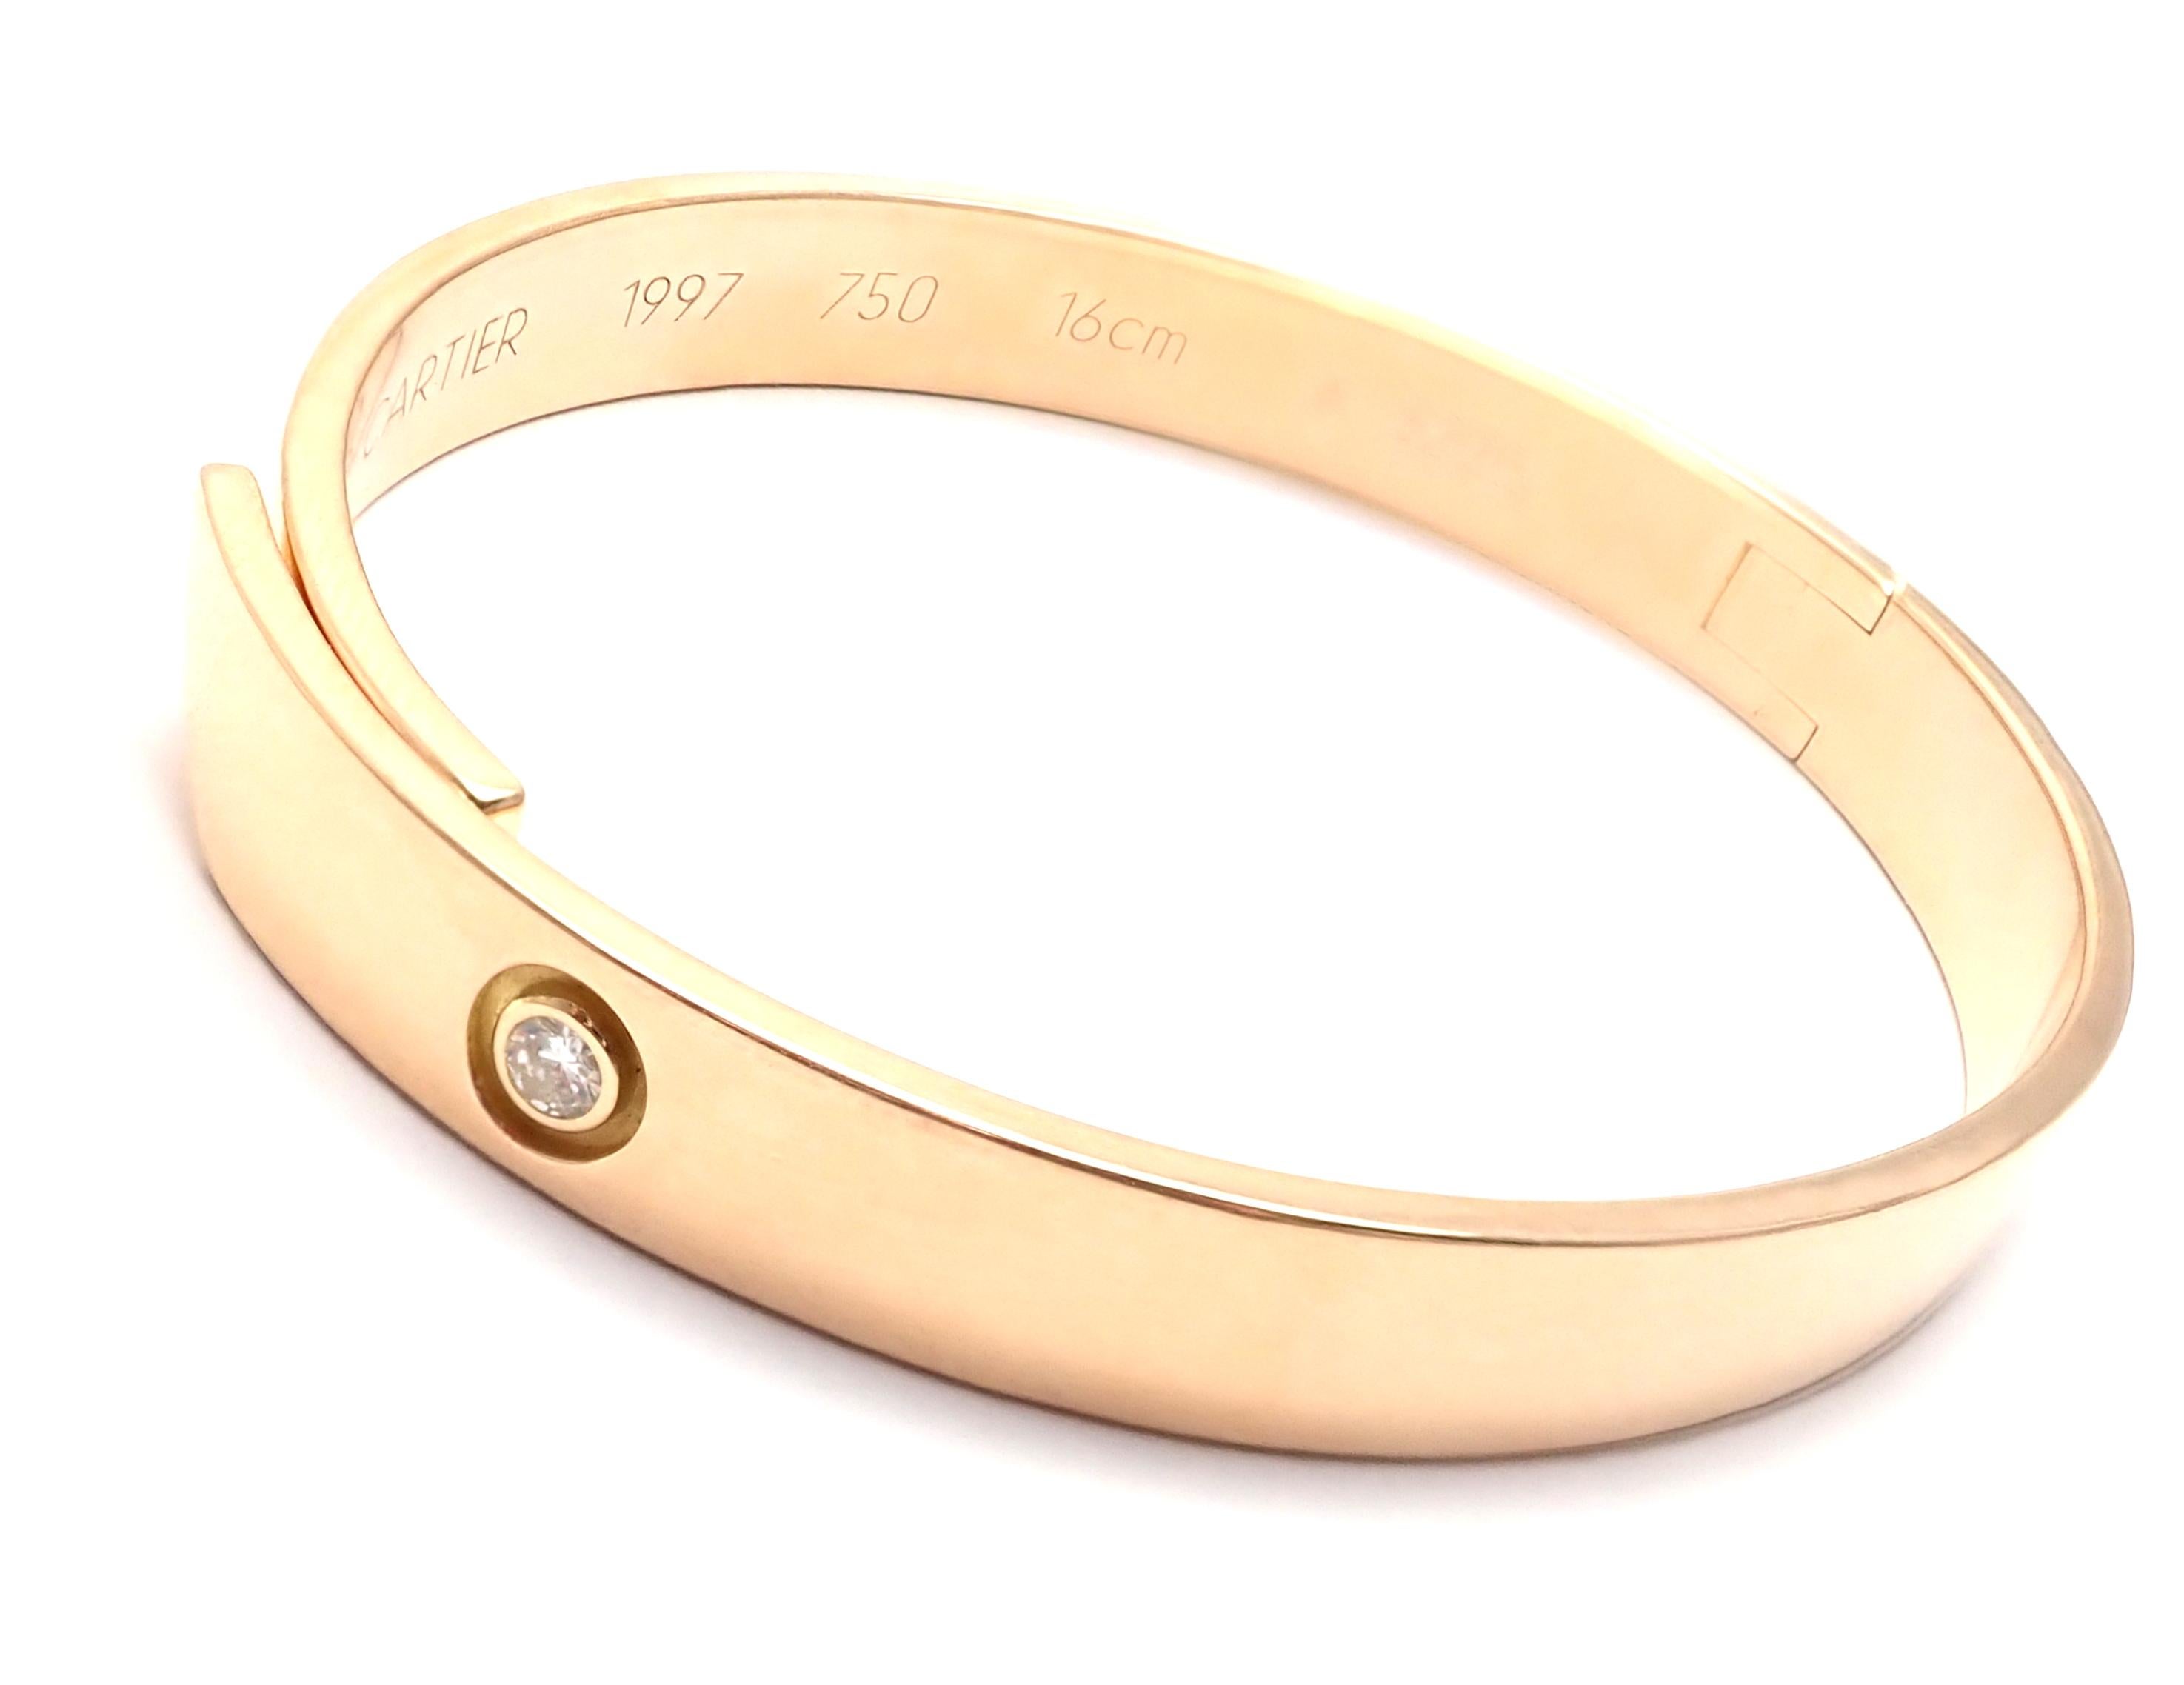 18k Rose Gold Diamond Anniversary Bangle Bracelet By Cartier. 
Size 16. 
With 1 round brilliant cut diamond VS1 clarity, G color total weight .10ct
Details: 
Size: 16
Width: 7mm
Weight: 34.6 grams
Stamped Hallmarks: Cartier 750 16cm 1997 X3225
*Free